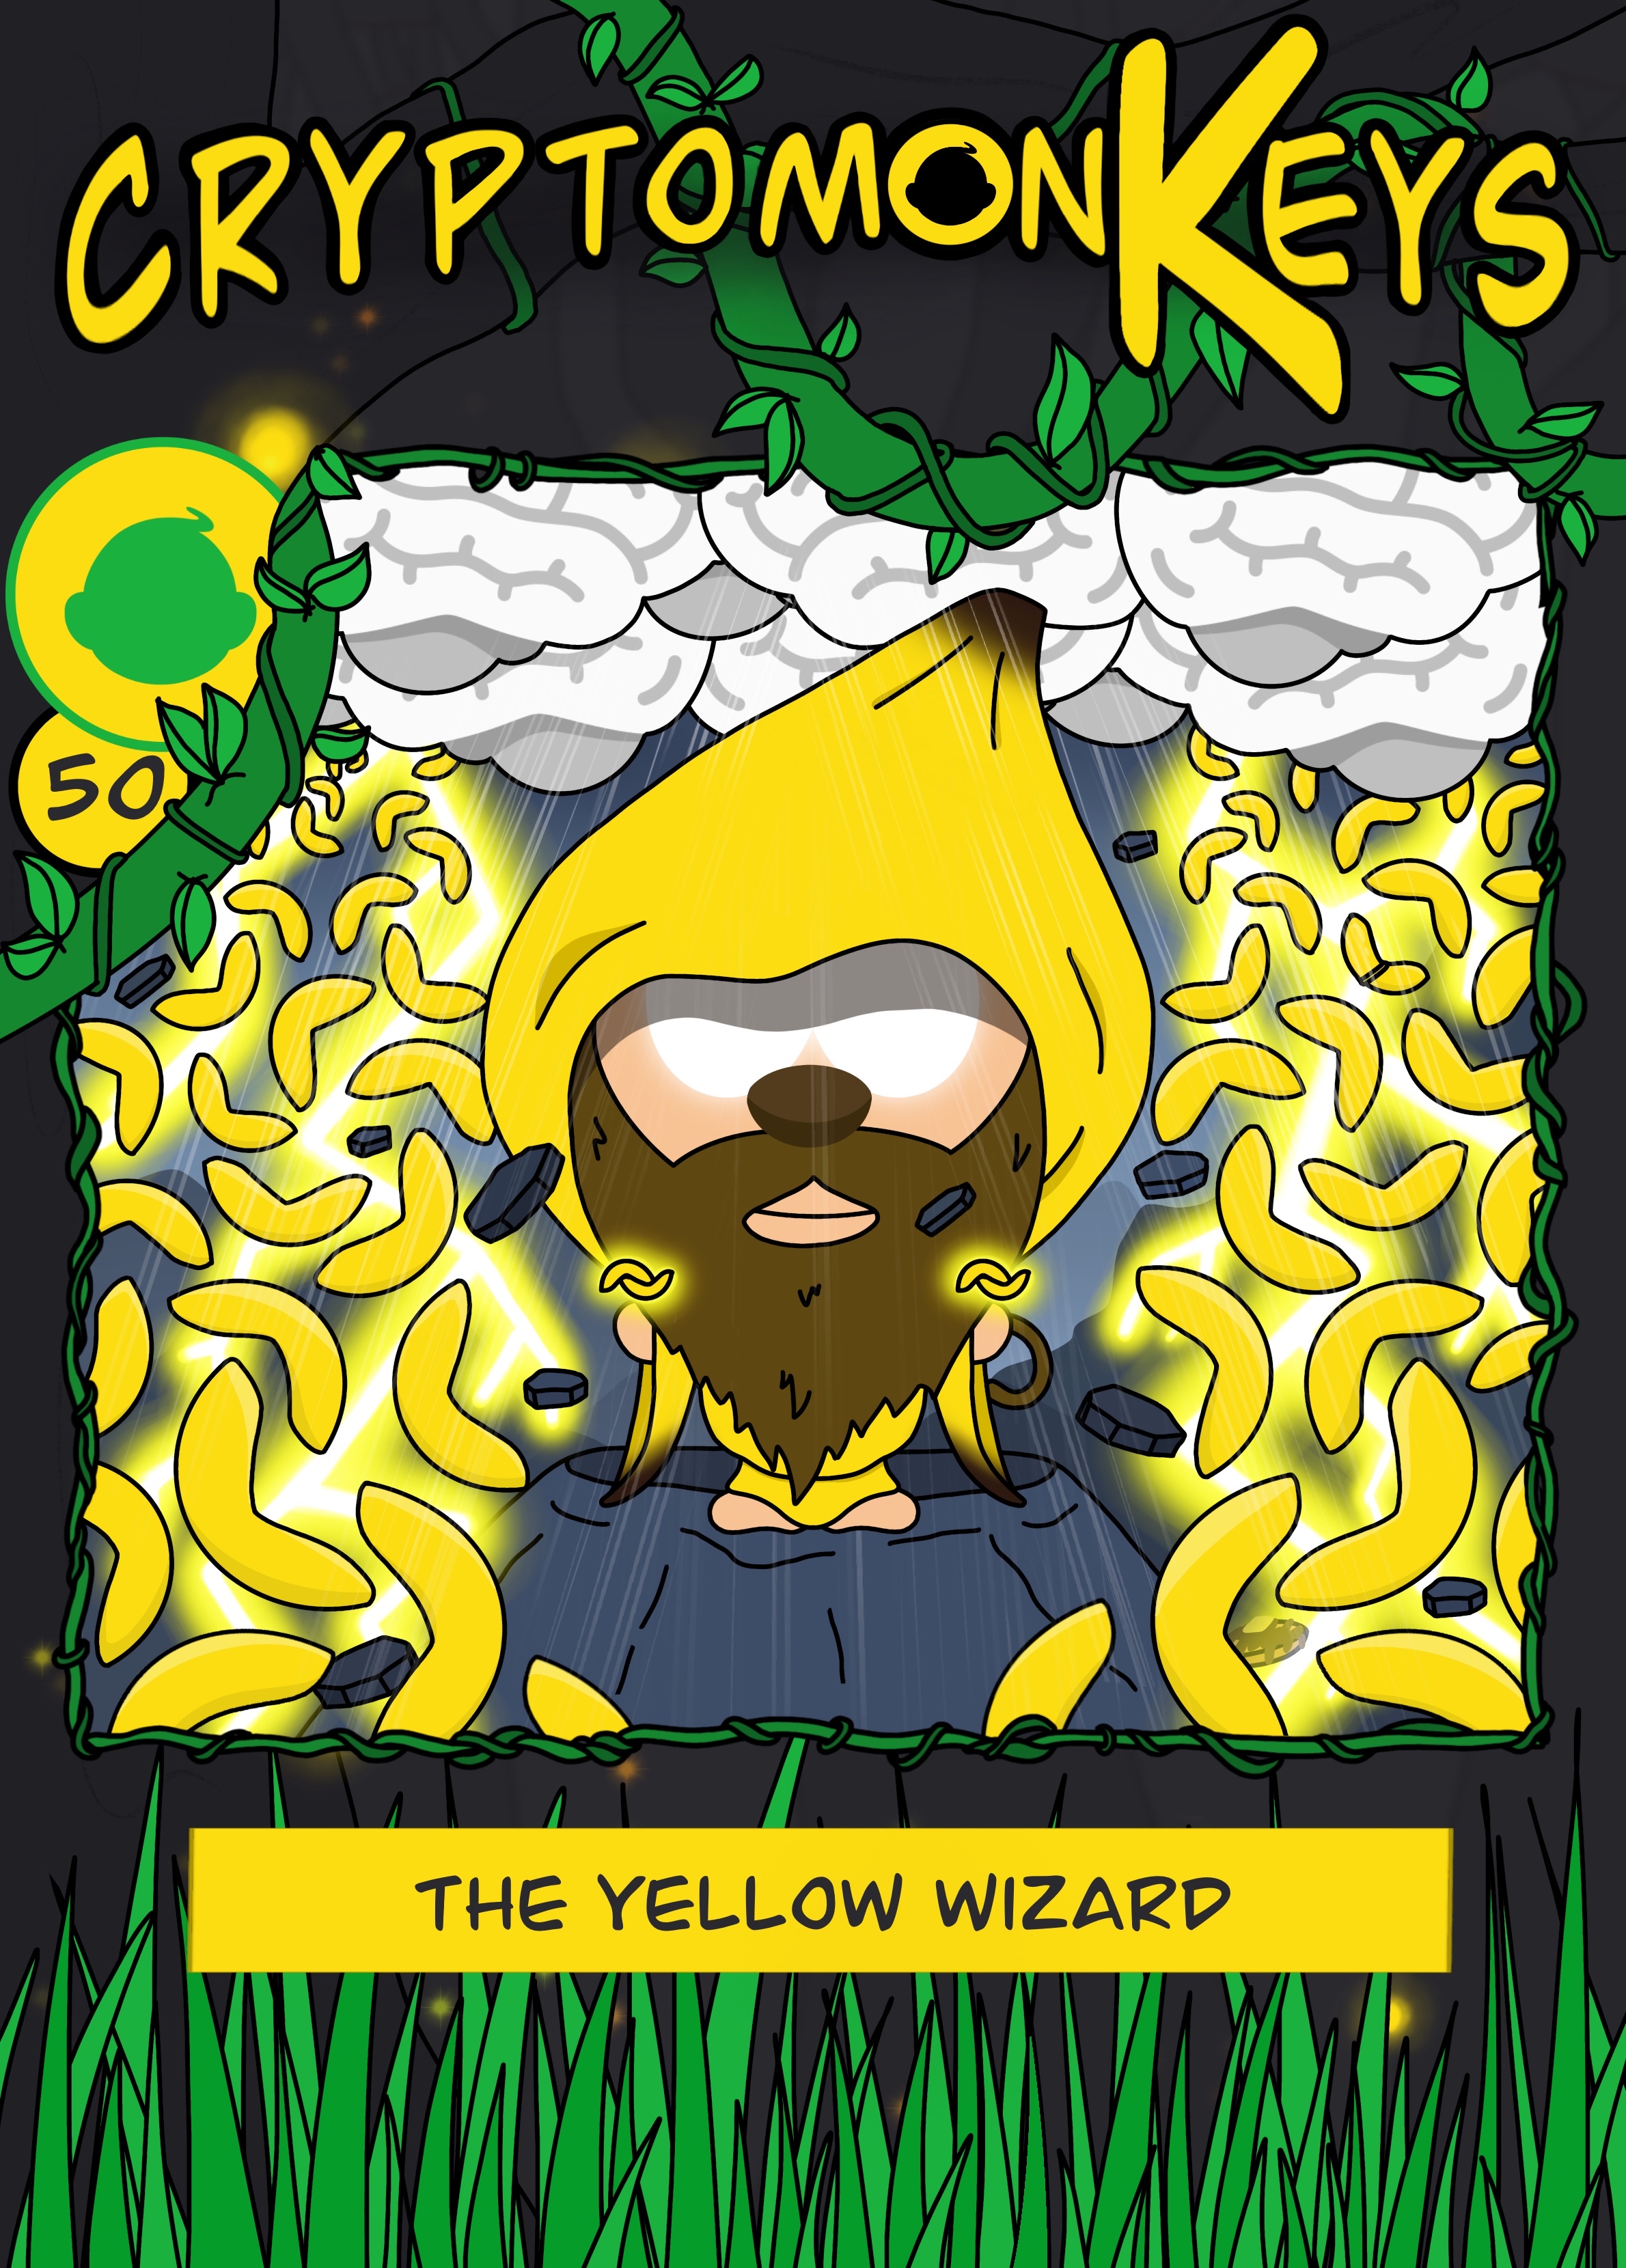 The Yellow Wizard